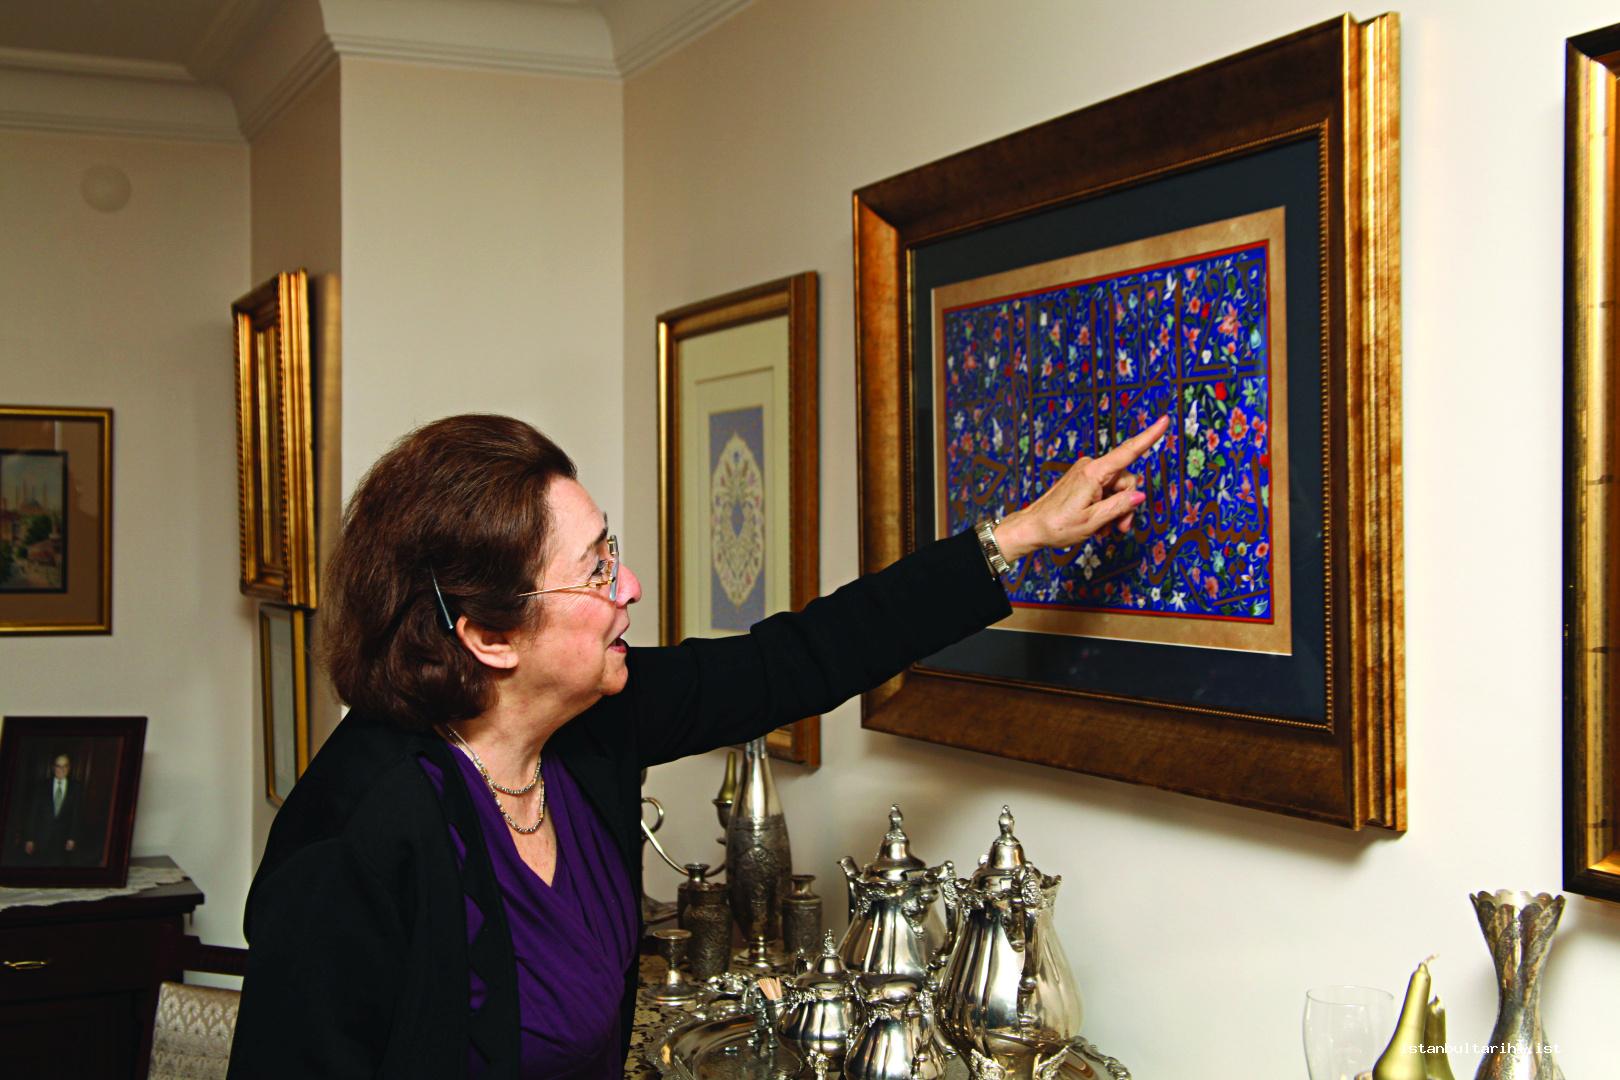 5- Gülbün Mesara is in her house in Çiftehavuzlar. She shows one of the works of her father in the room that she reserved her father.